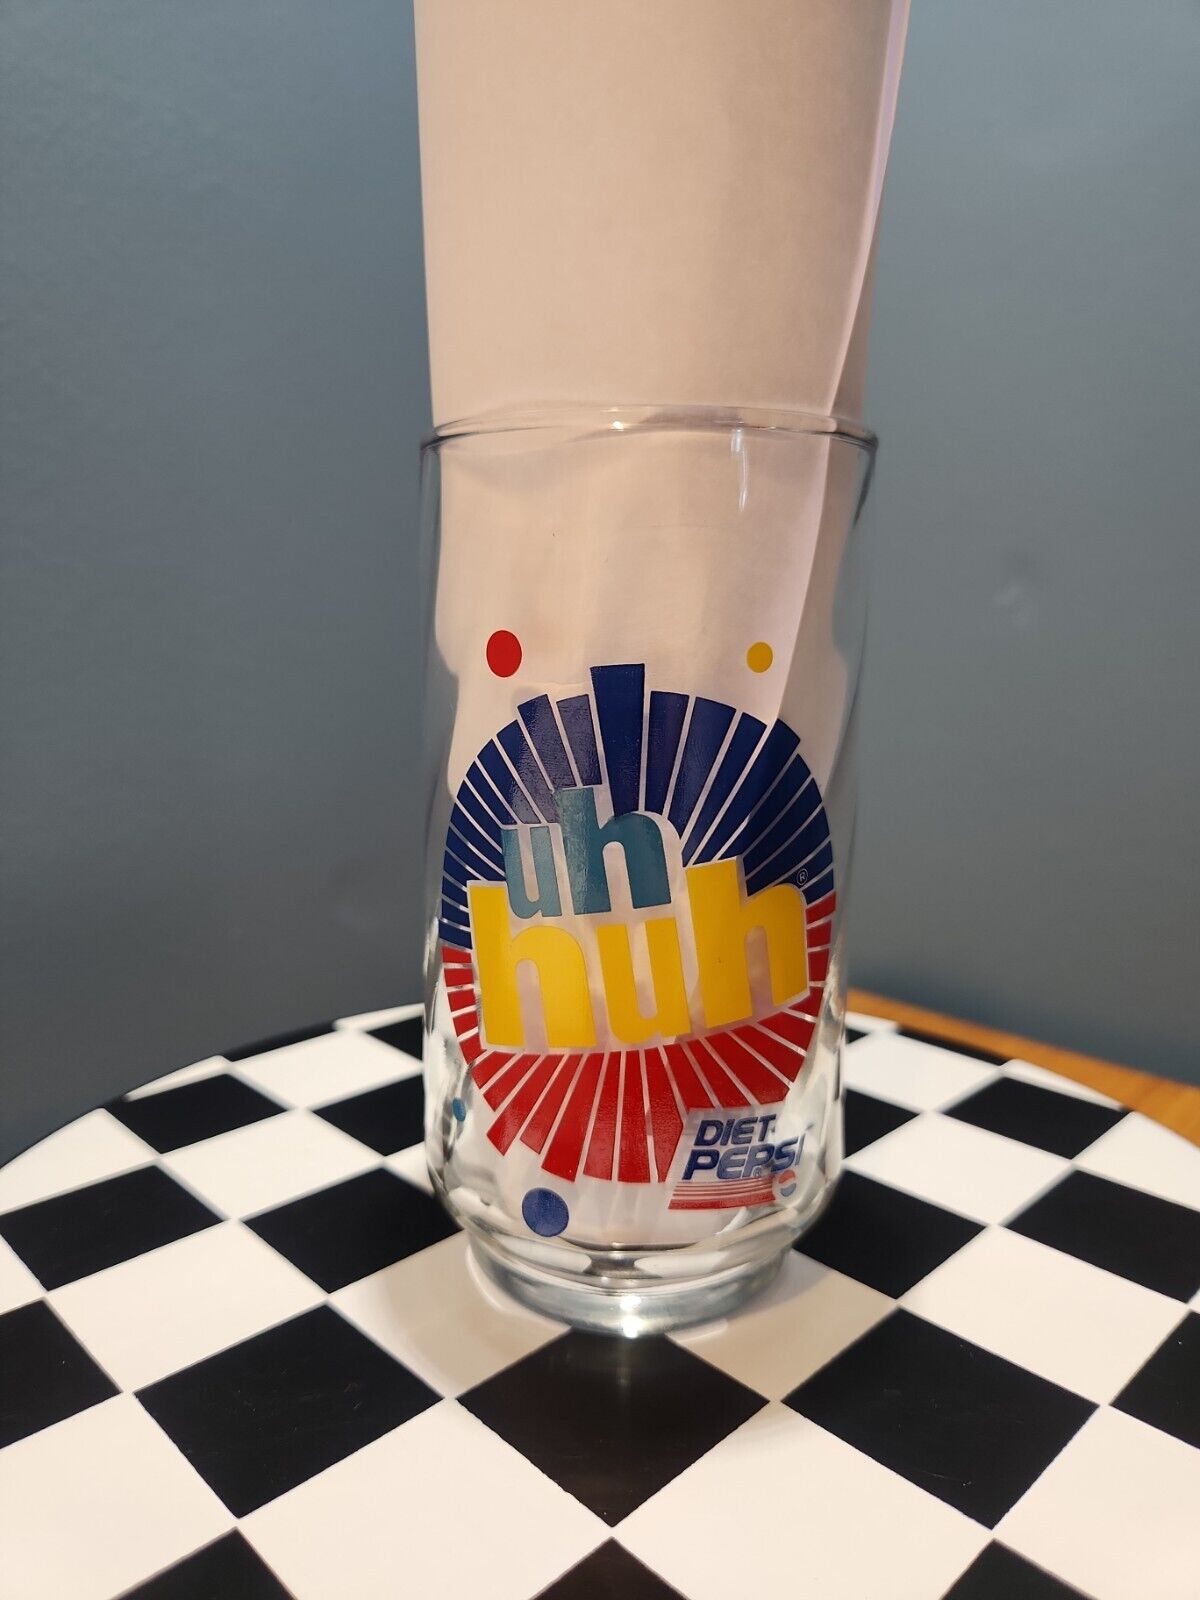 Vintage Diet Pepsi Glass - You Got The Right One Baby Uh Huh - Ray Charles